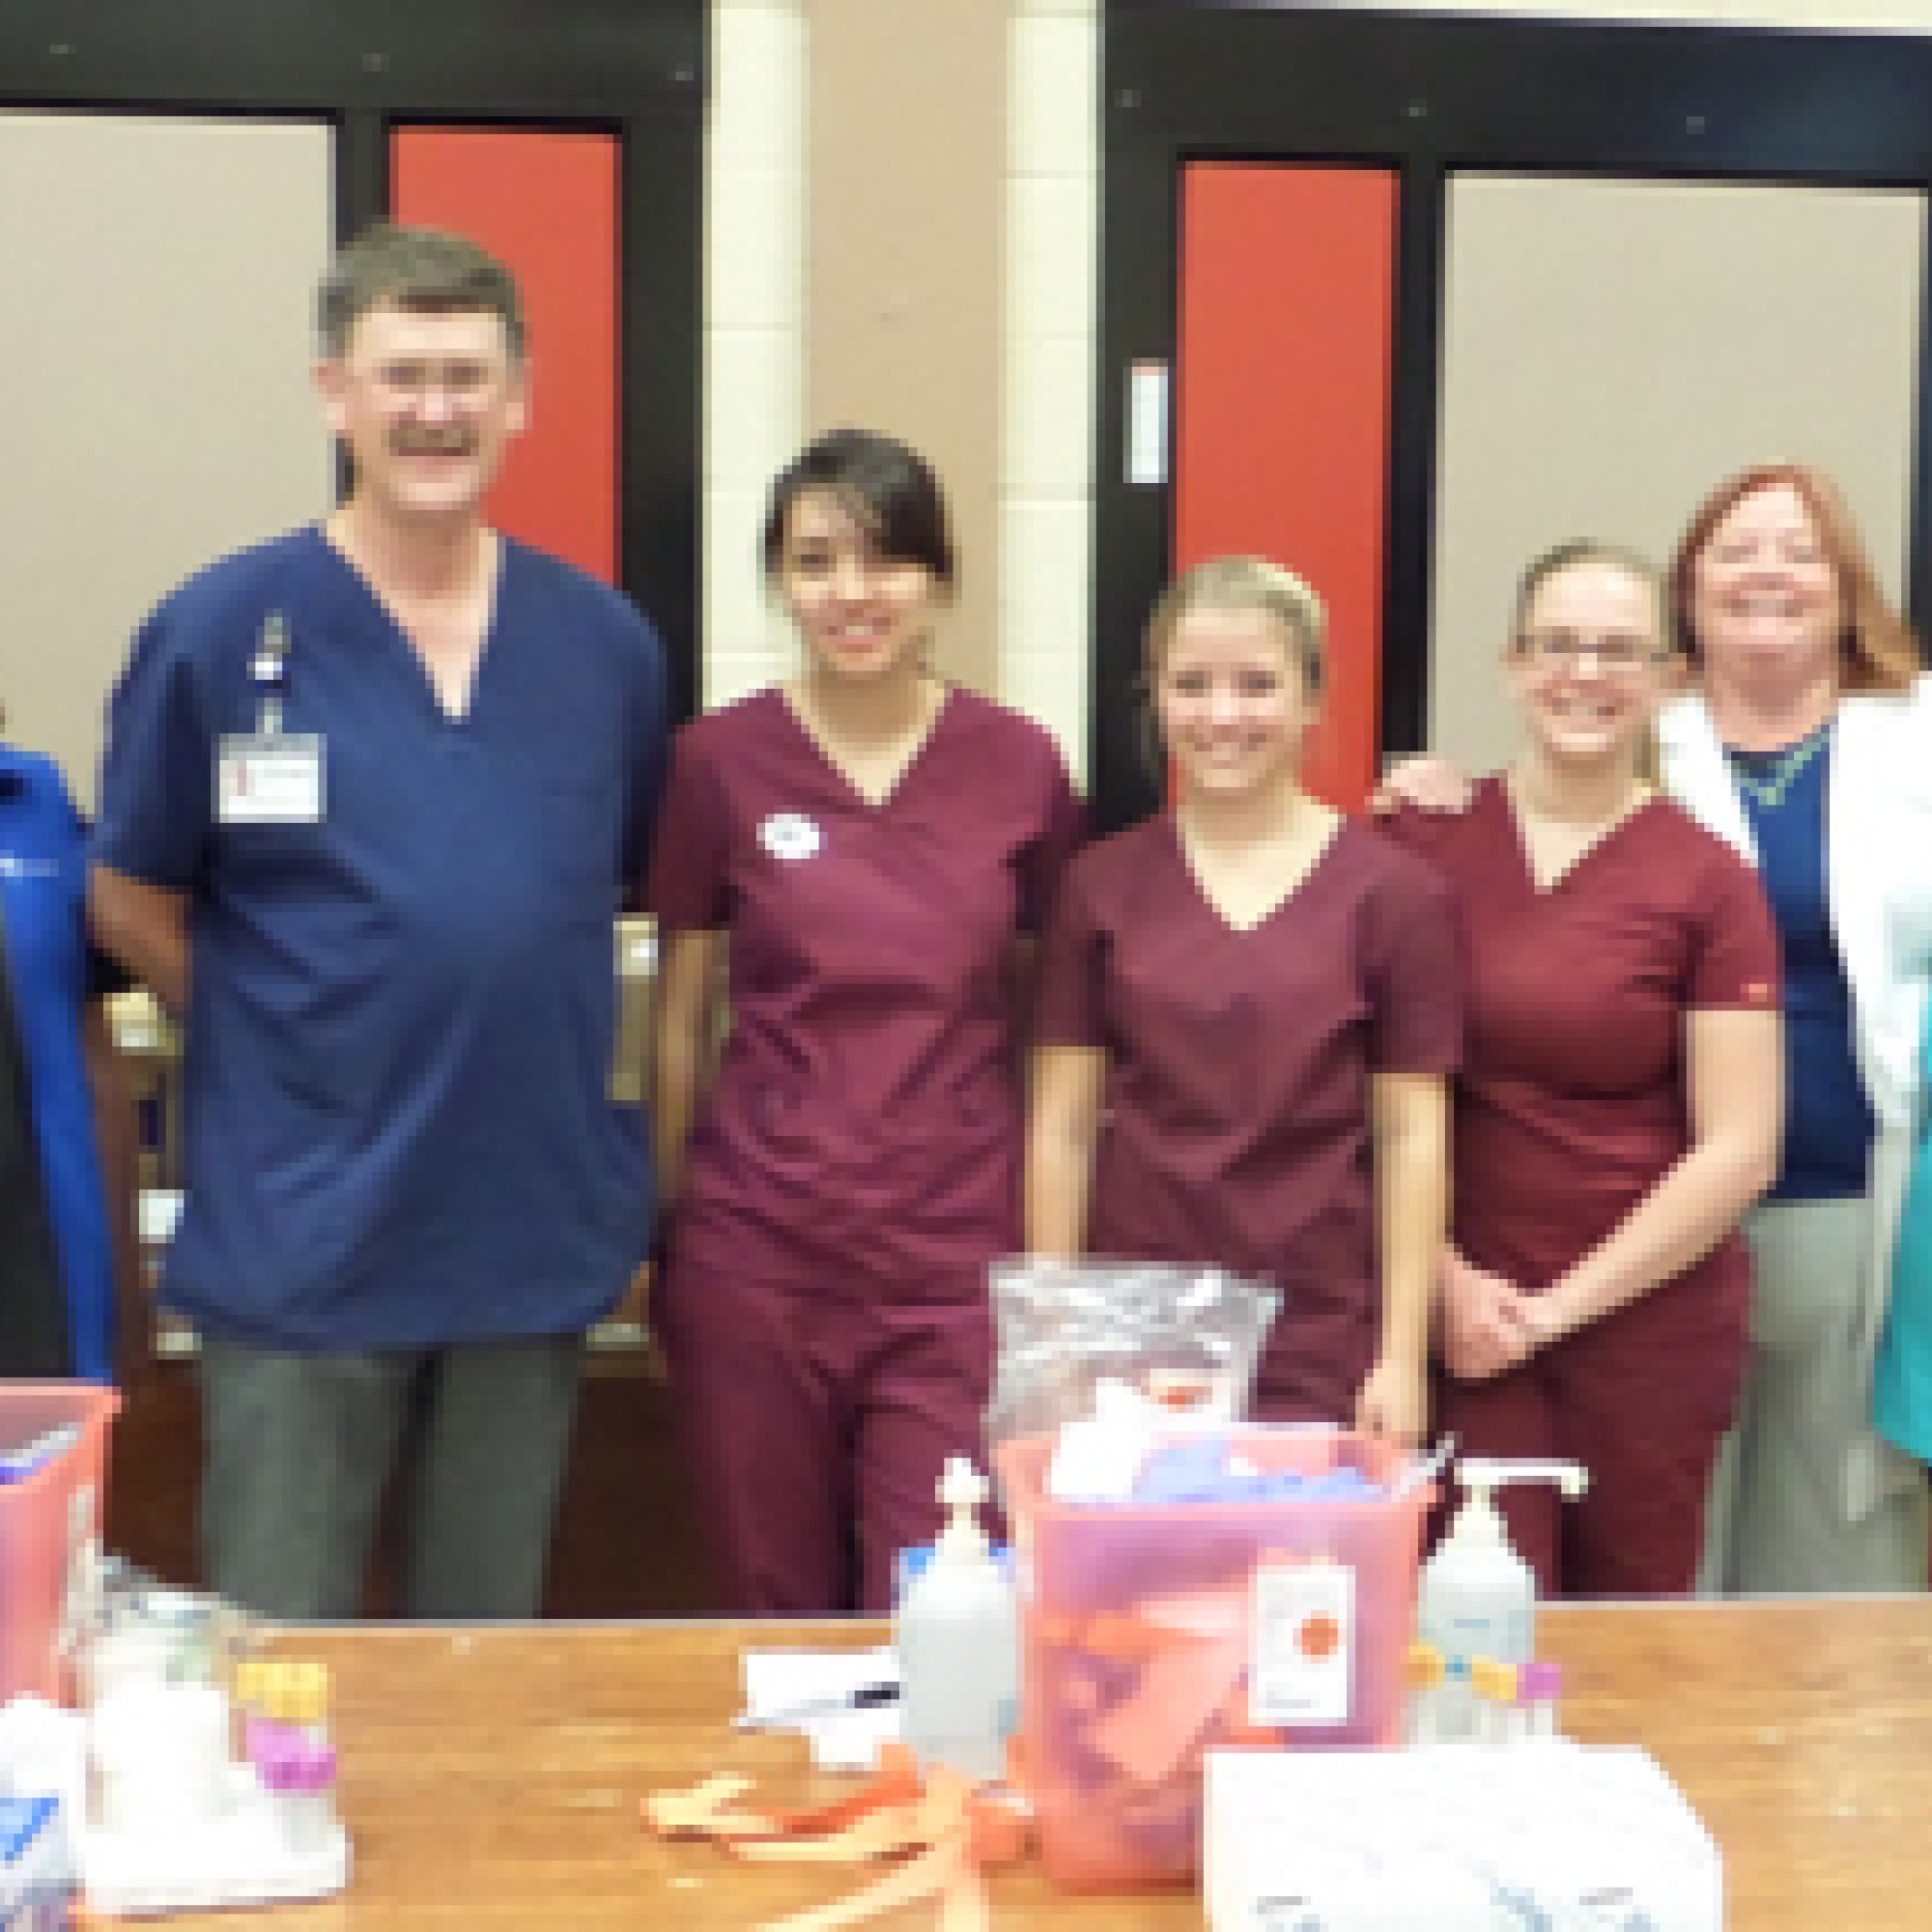 Phlebotomy students in classroom